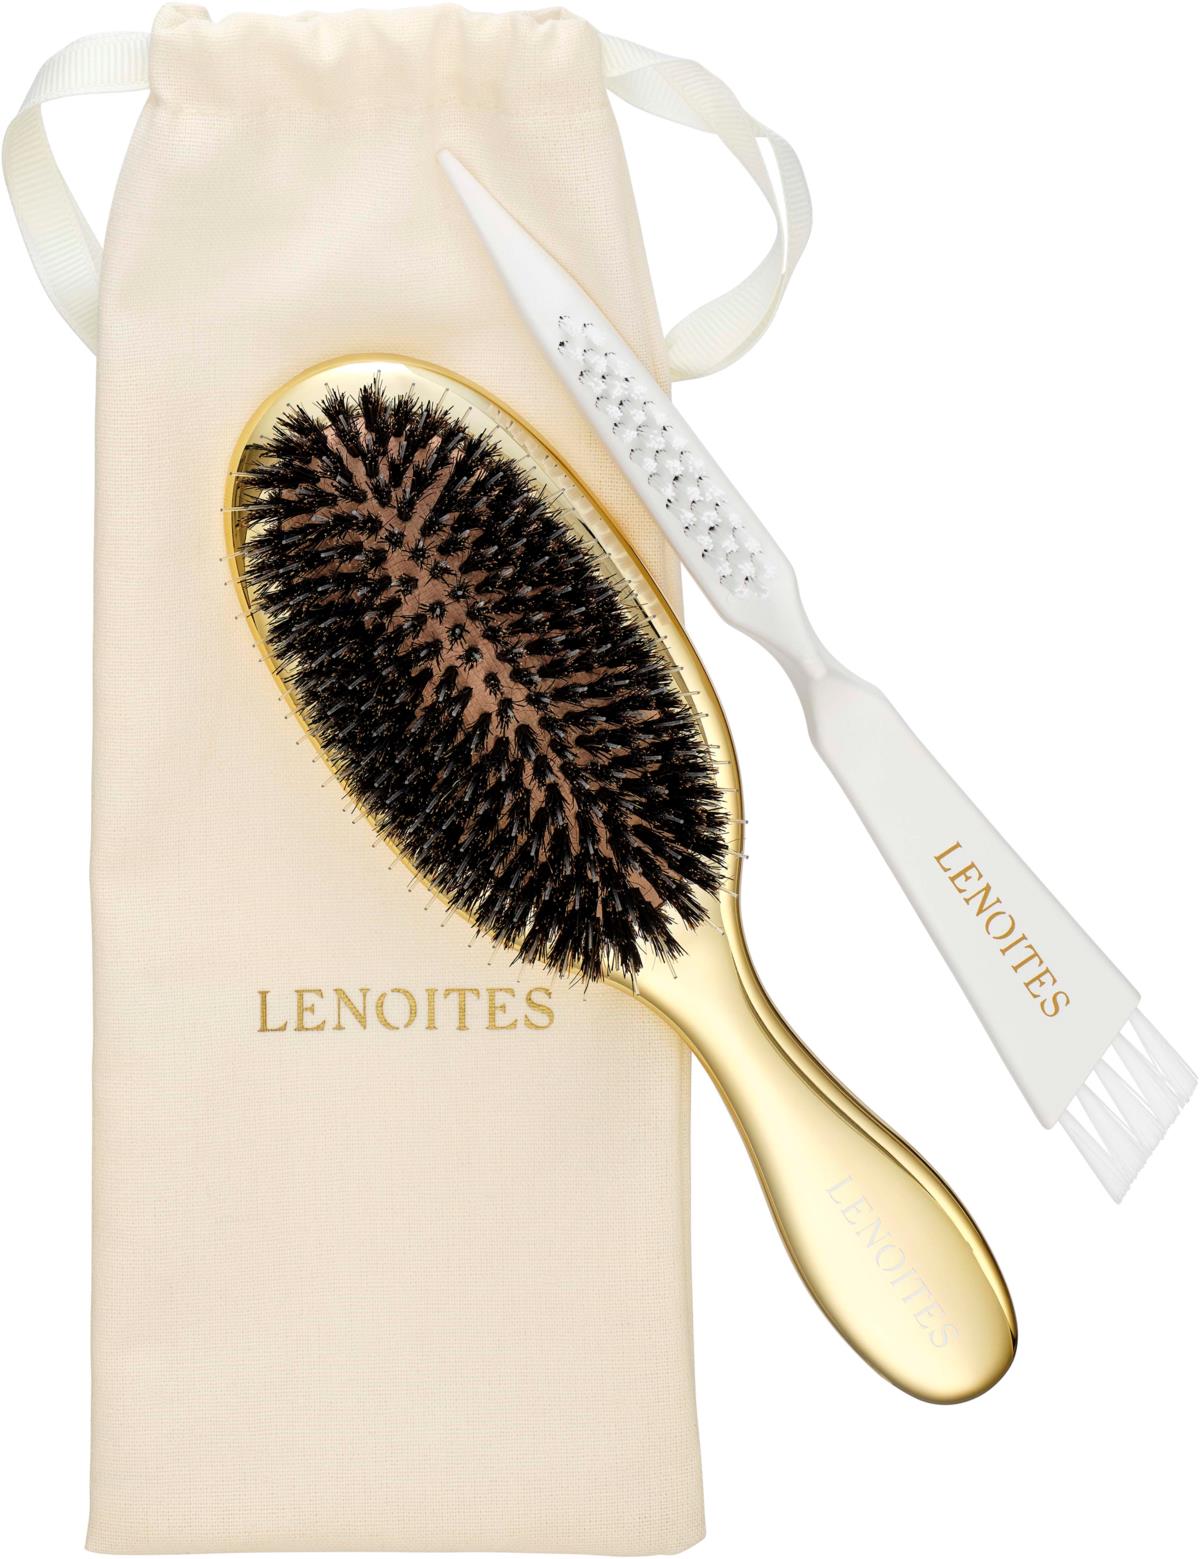 https://lyko.com/globalassets/product-images/lenoites-hair-brush-wild-boar-with-pouch-and-cleaner-tool-3171-125-0000_1.jpg?ref=A6E61BD562&w=1200&h=1559&quality=75